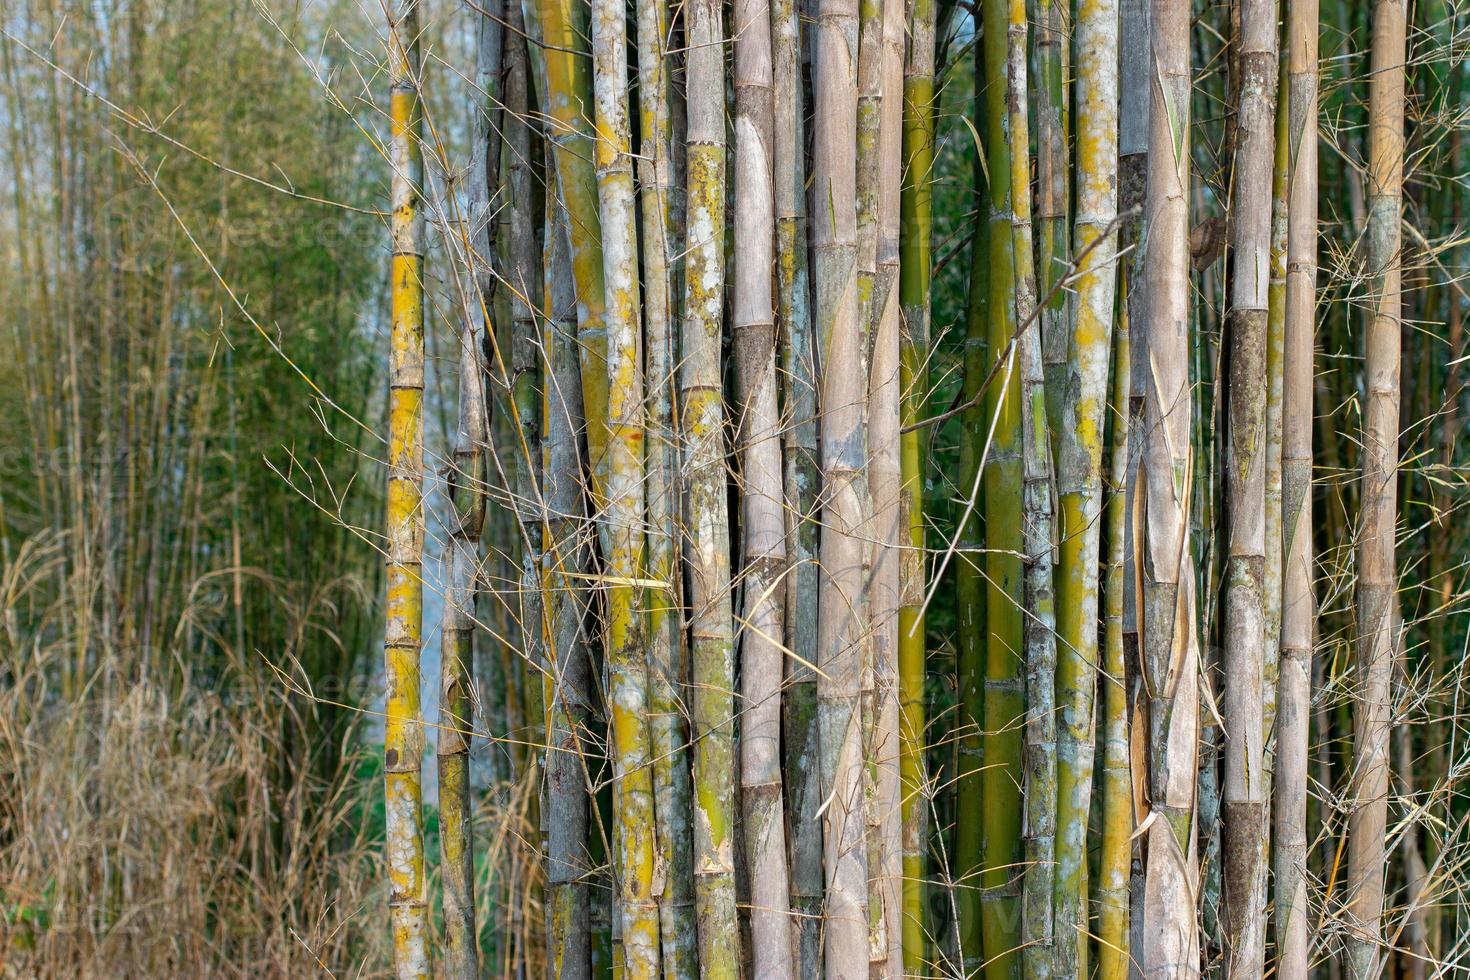 many green bamboo trees in nature, Bamboo can be used for many uses. photo